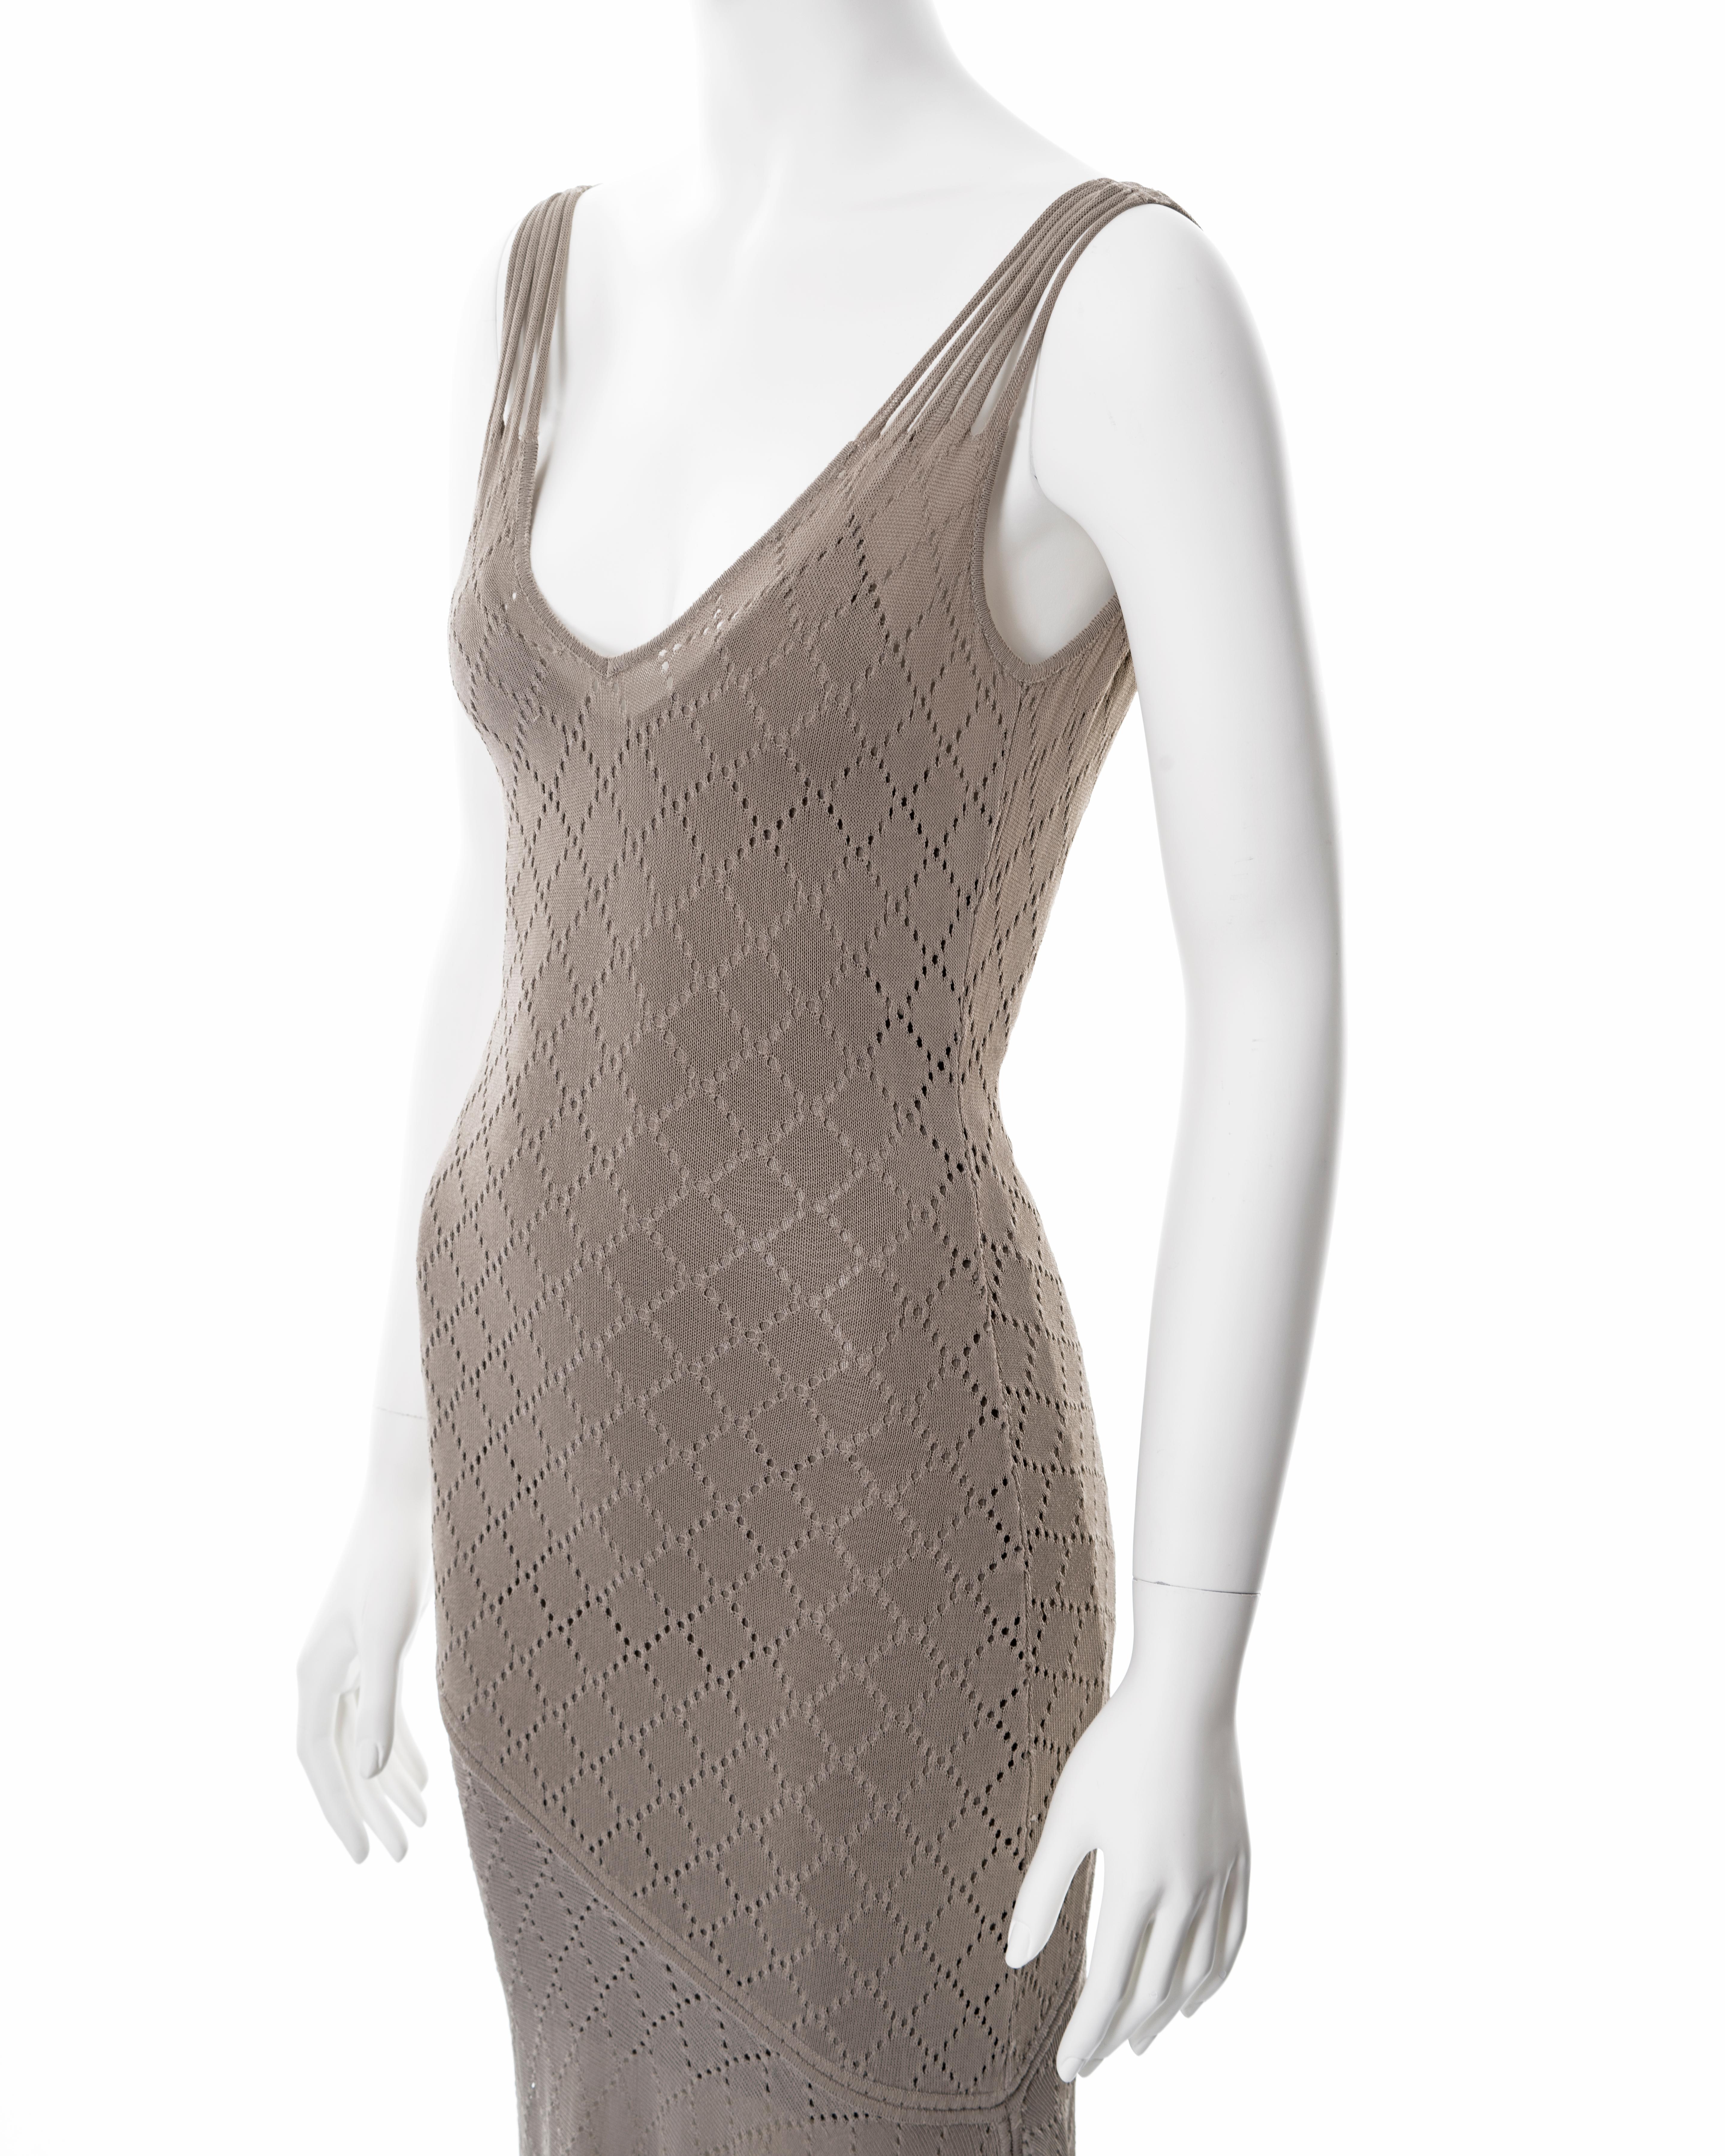 Christian Dior by John Galliano taupe open-knit dress, ss 2001 For Sale 2